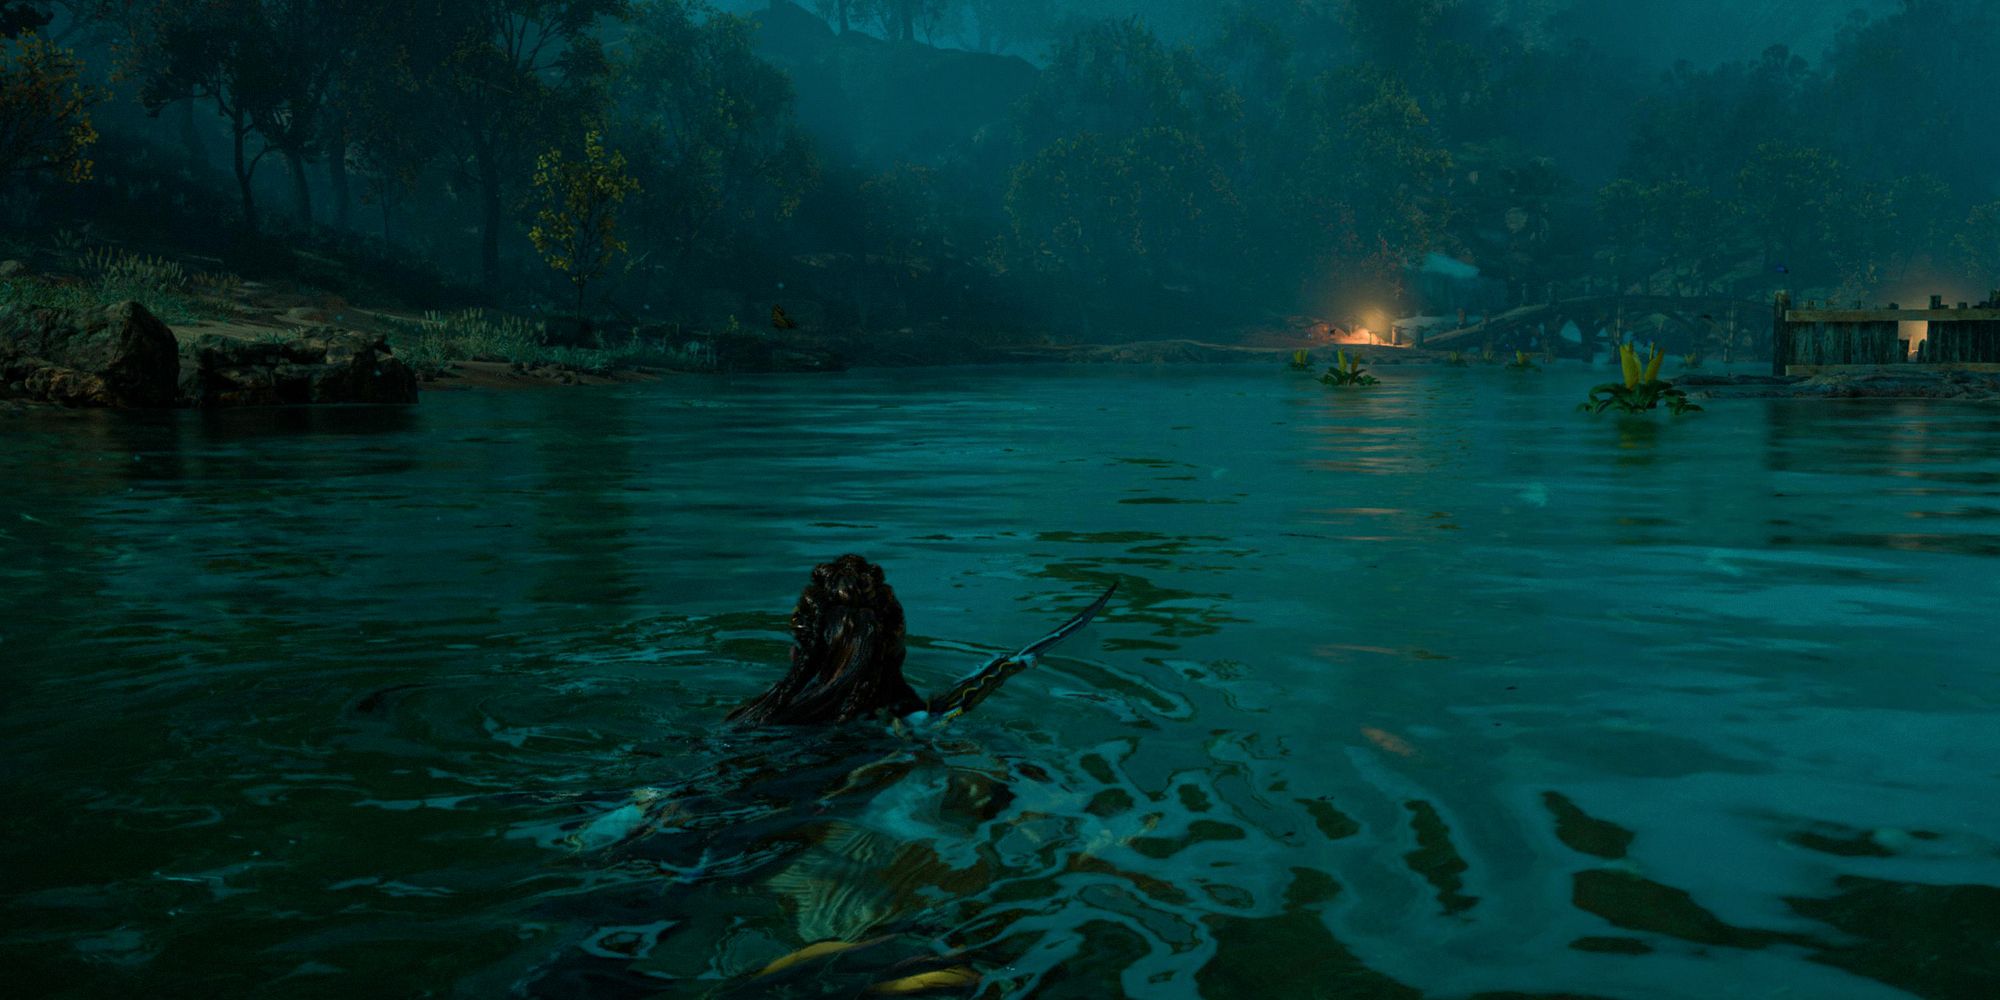 Horizon Forbidden West Aloy in the water. Night time, green and blue lighting.